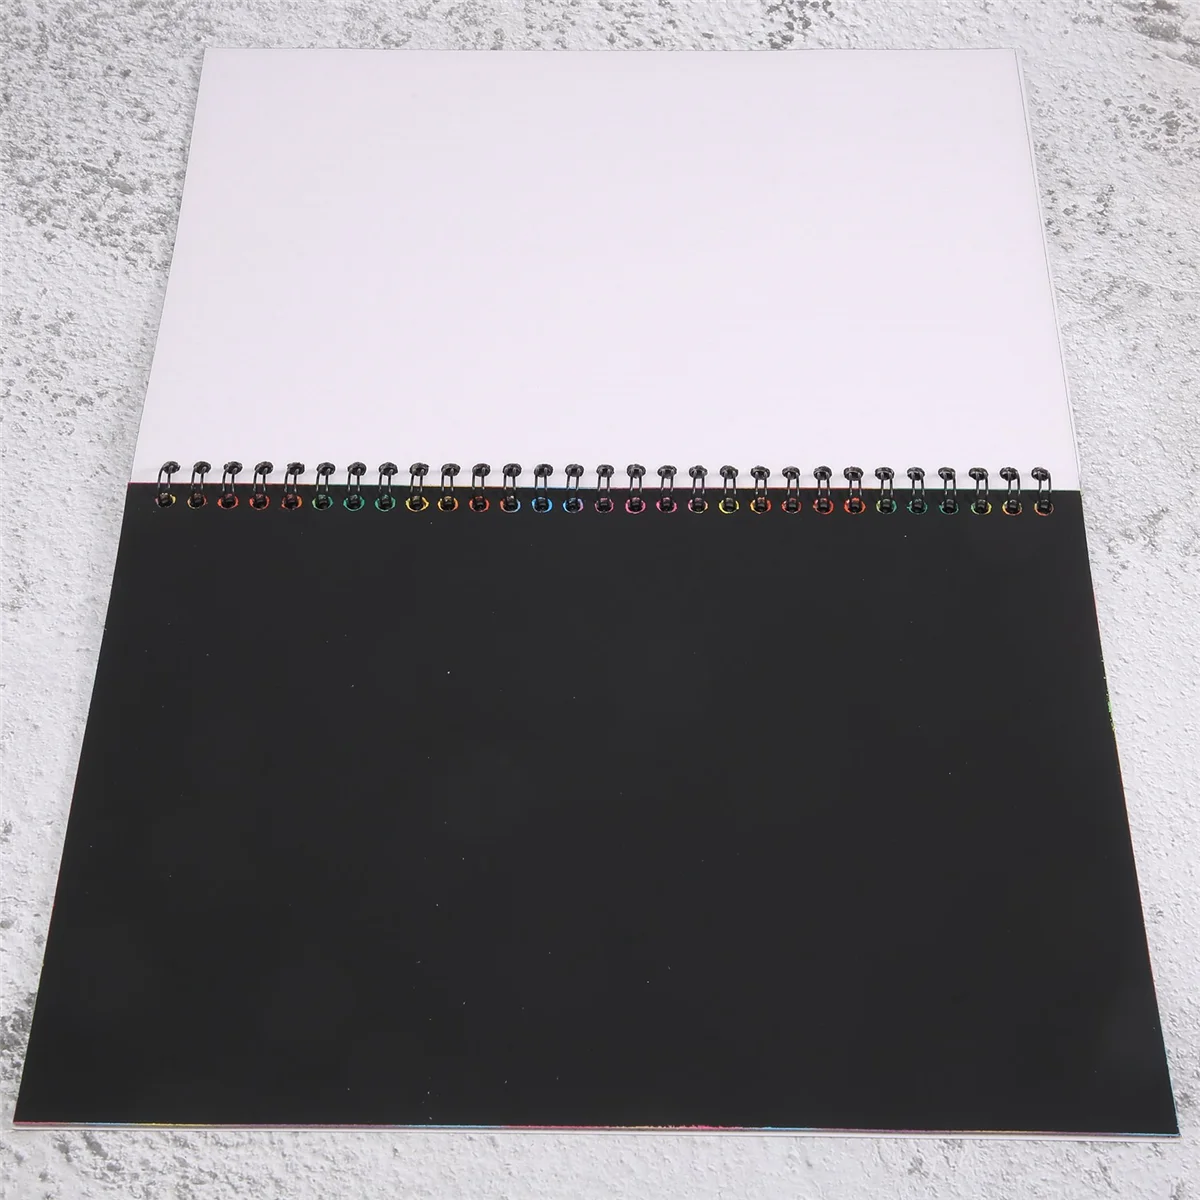 

19X26Cm Large Magic Color Rainbow Scratch Paper Note Book Black Diy Drawing Toys Scraping Painting Kid Doodle